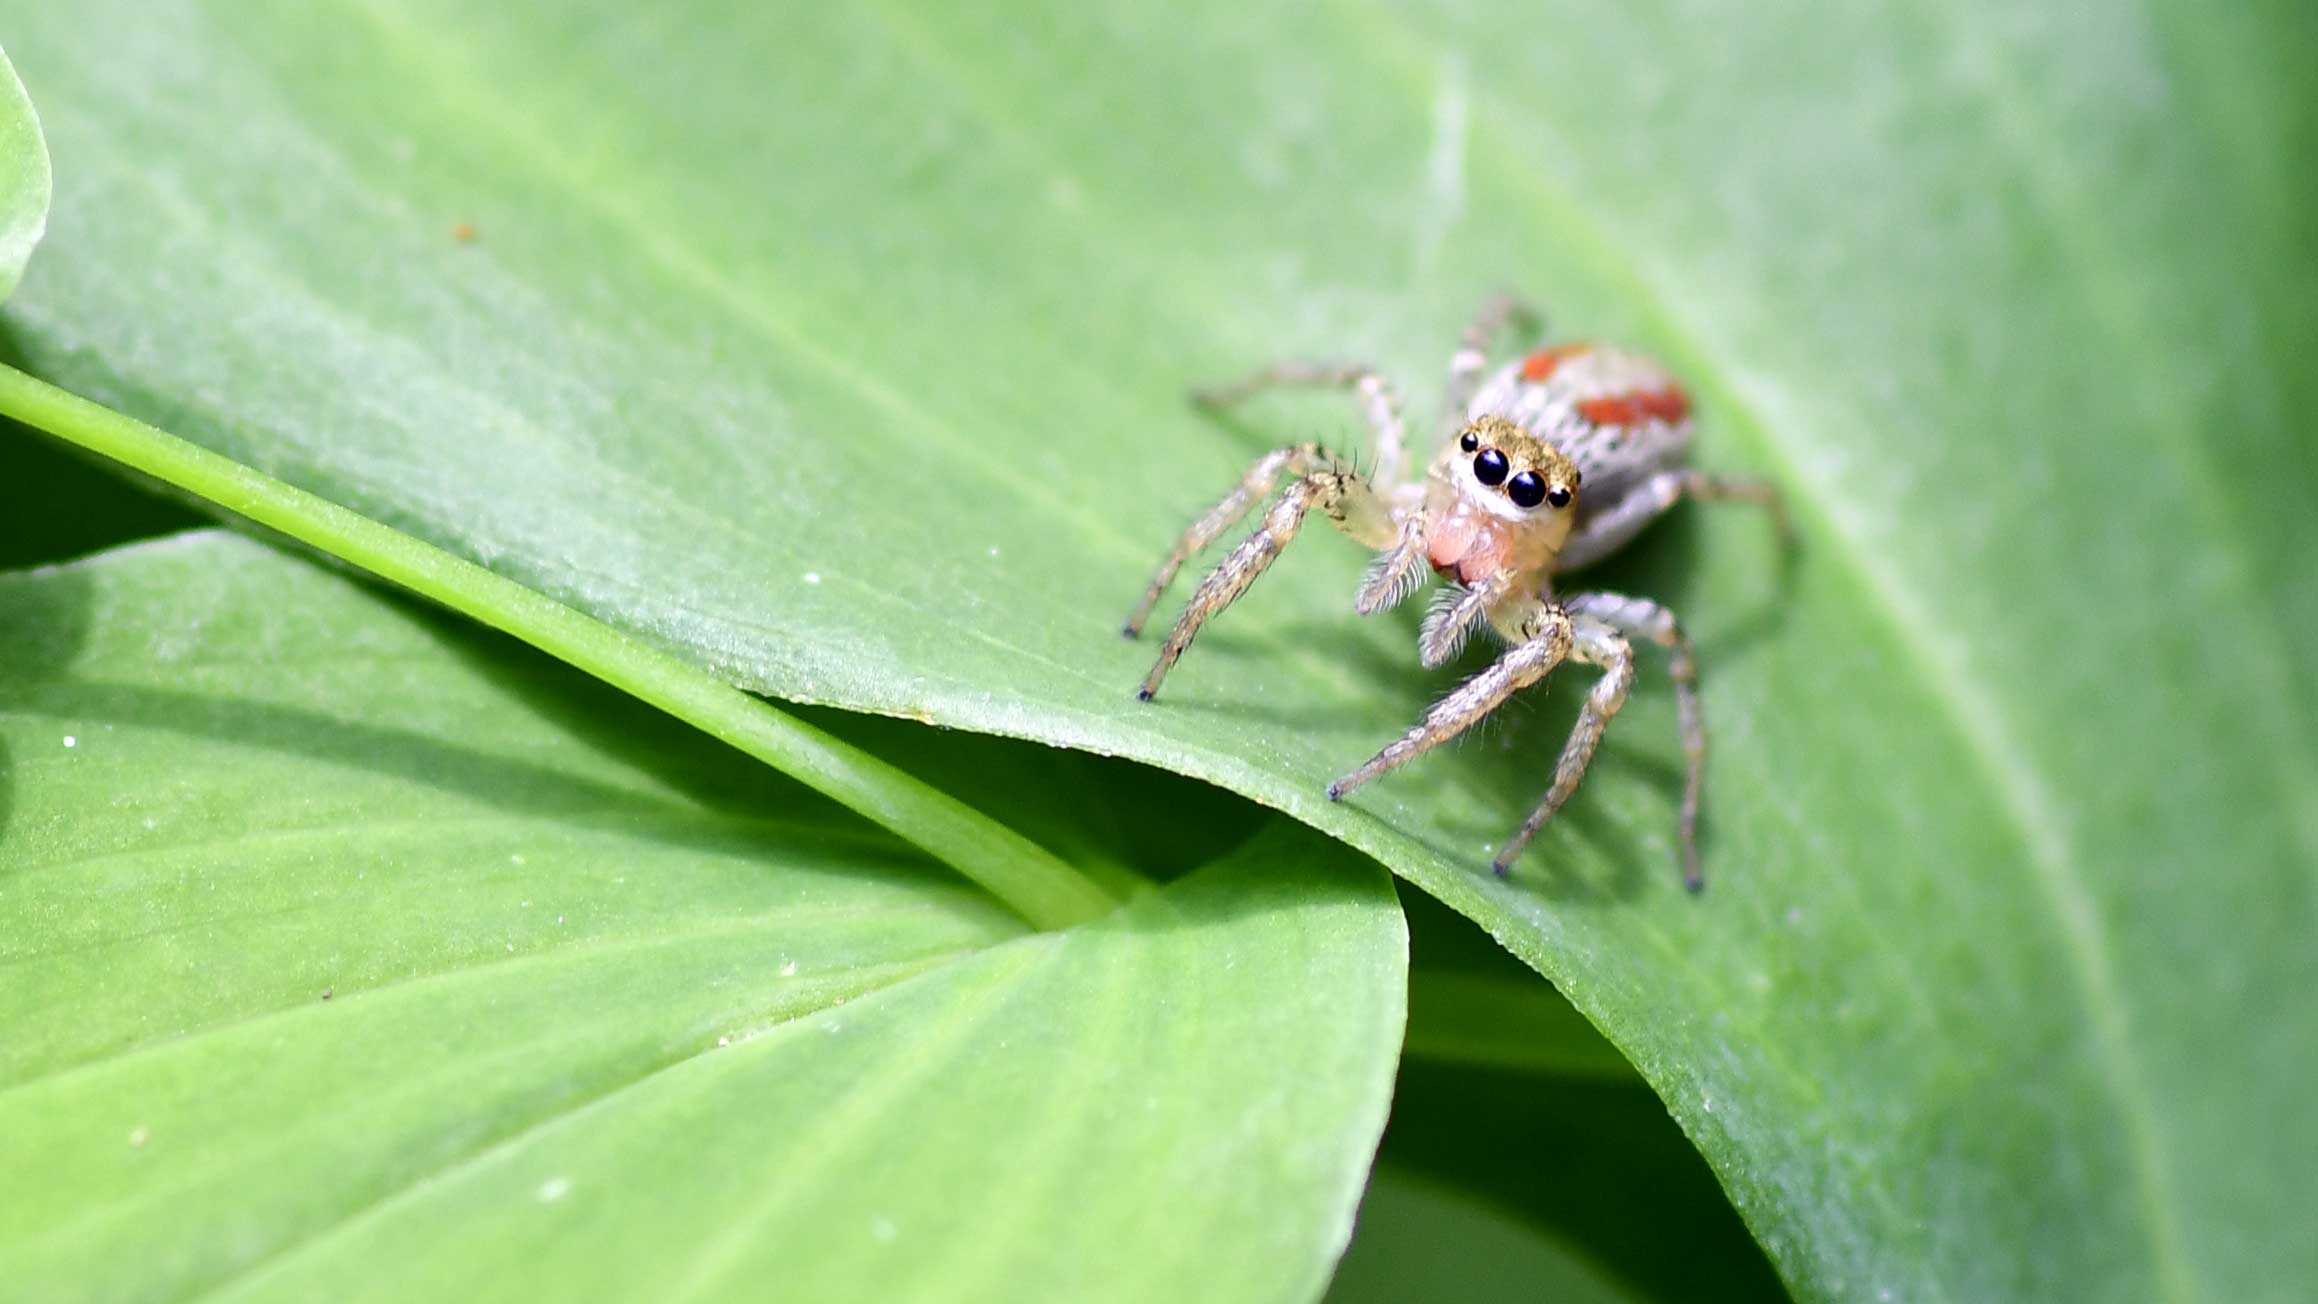 A spider on a leaf.